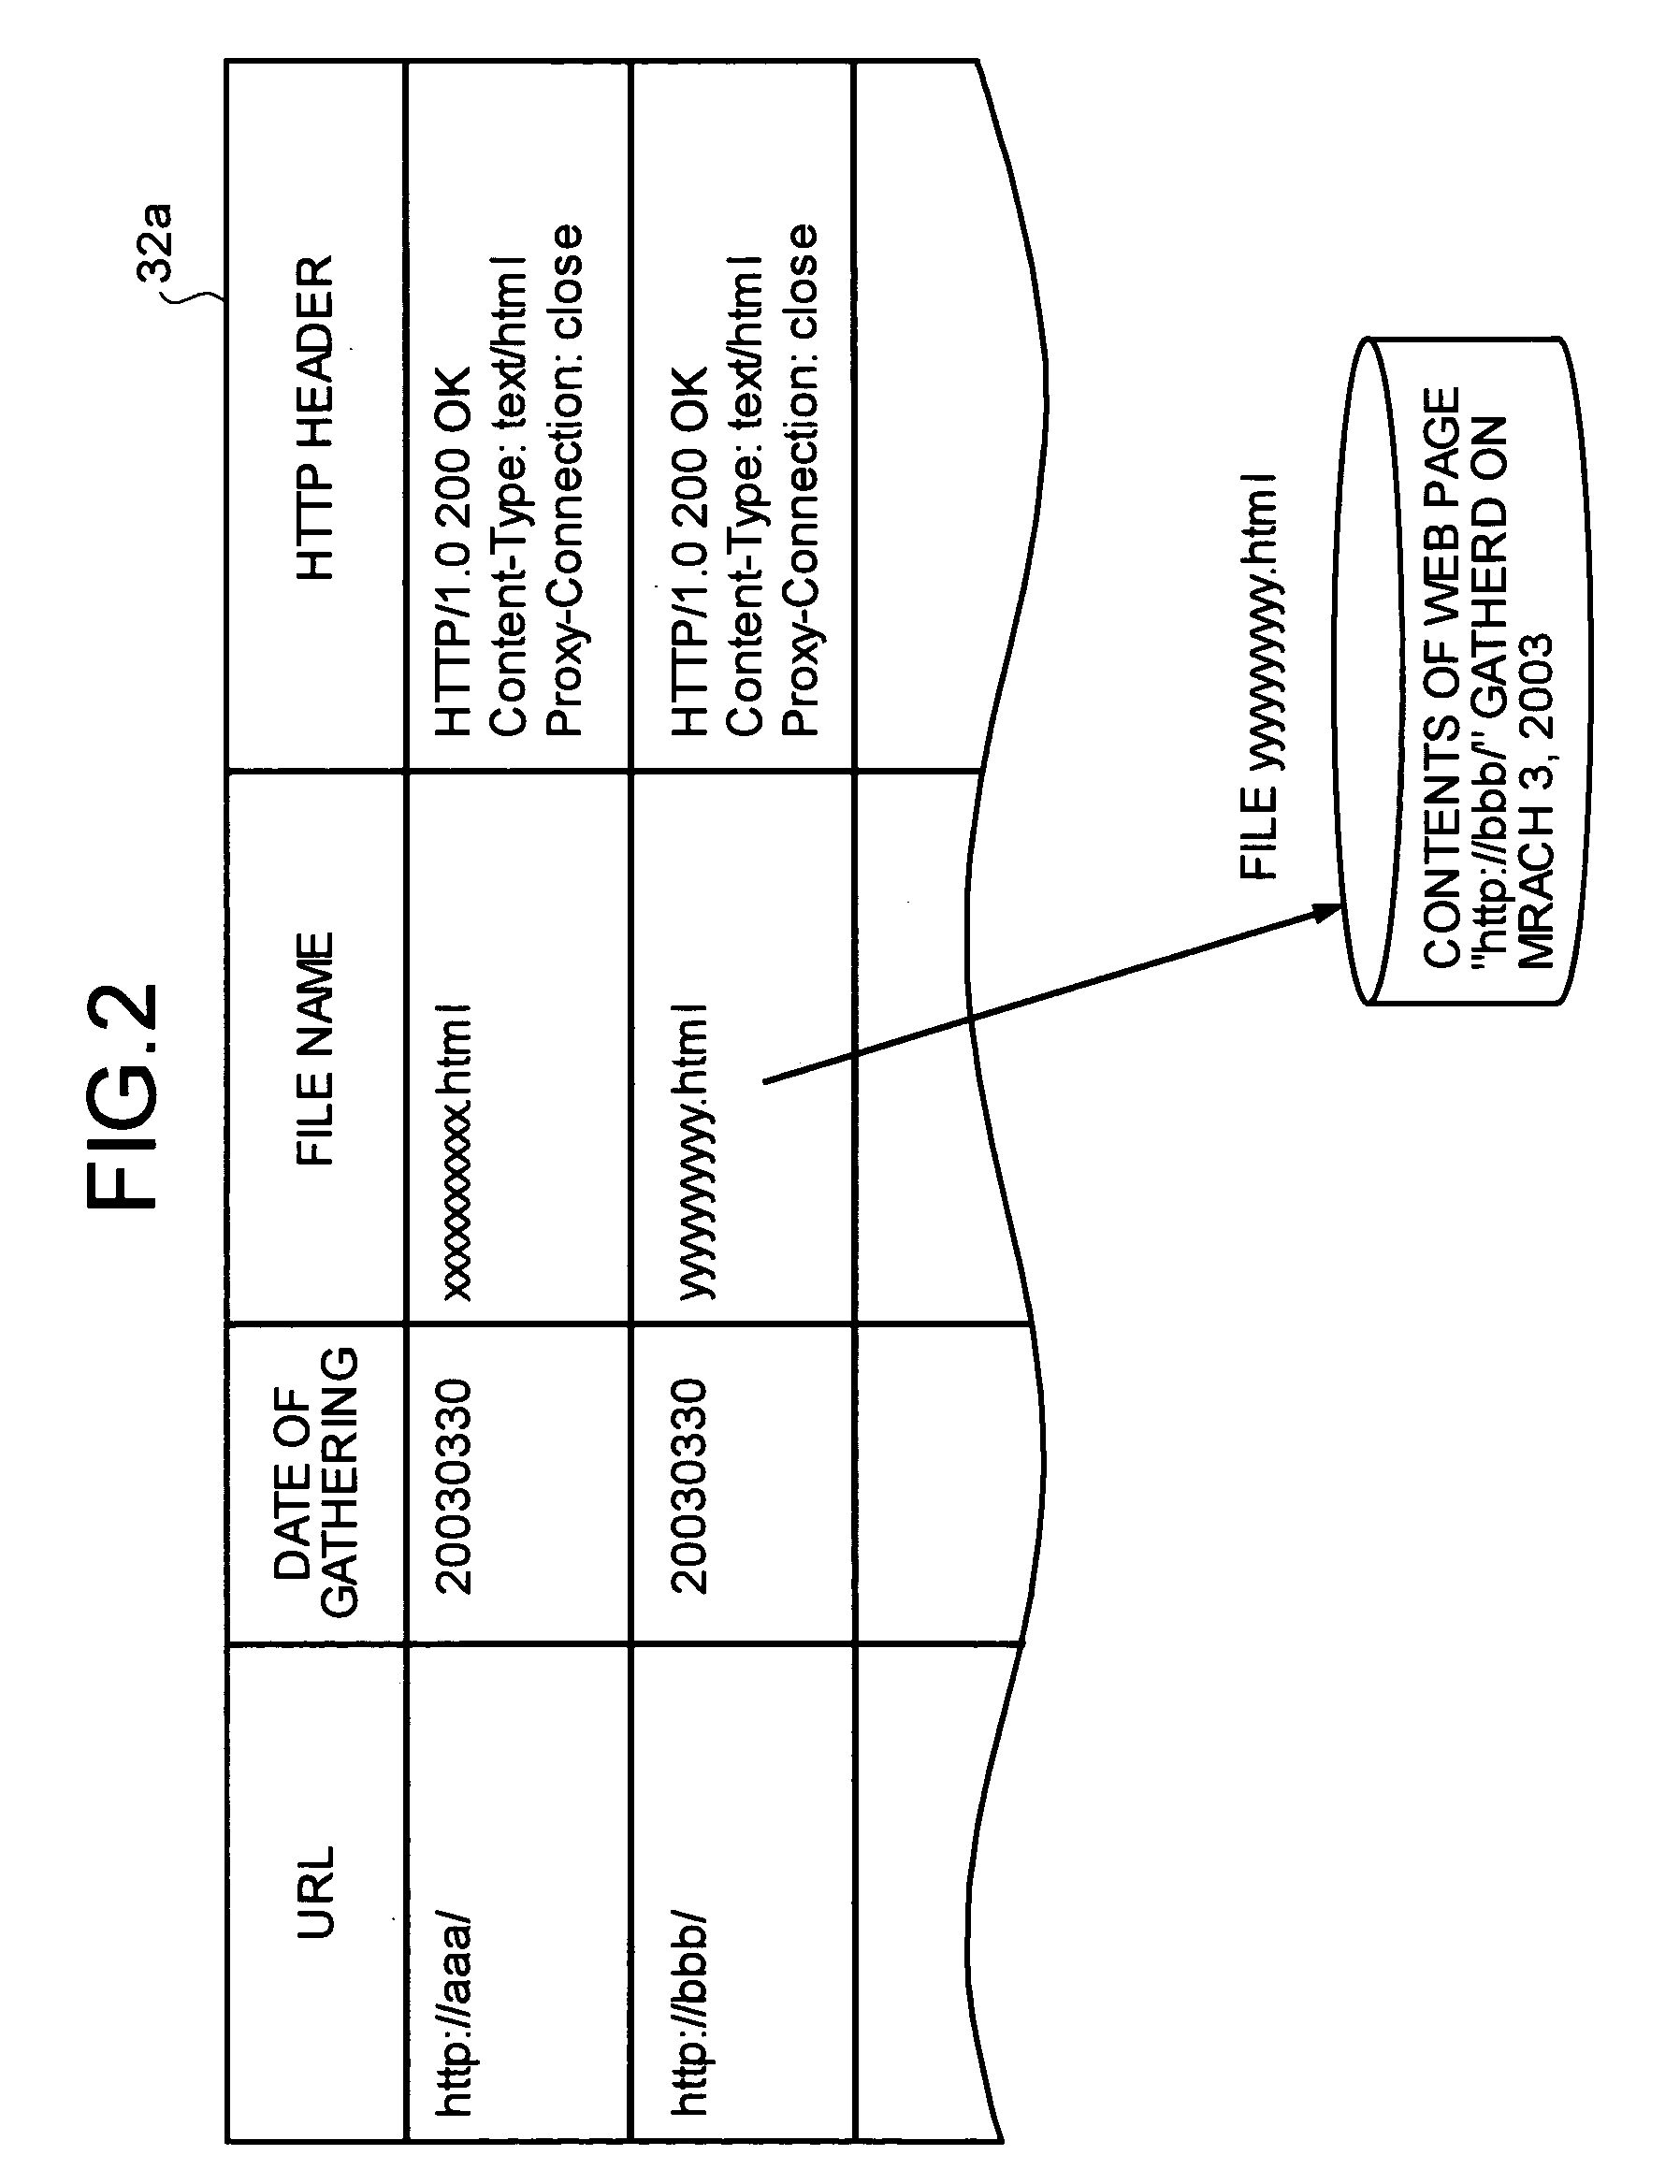 Method of and apparatus for gathering information, system for gathering information, and computer program